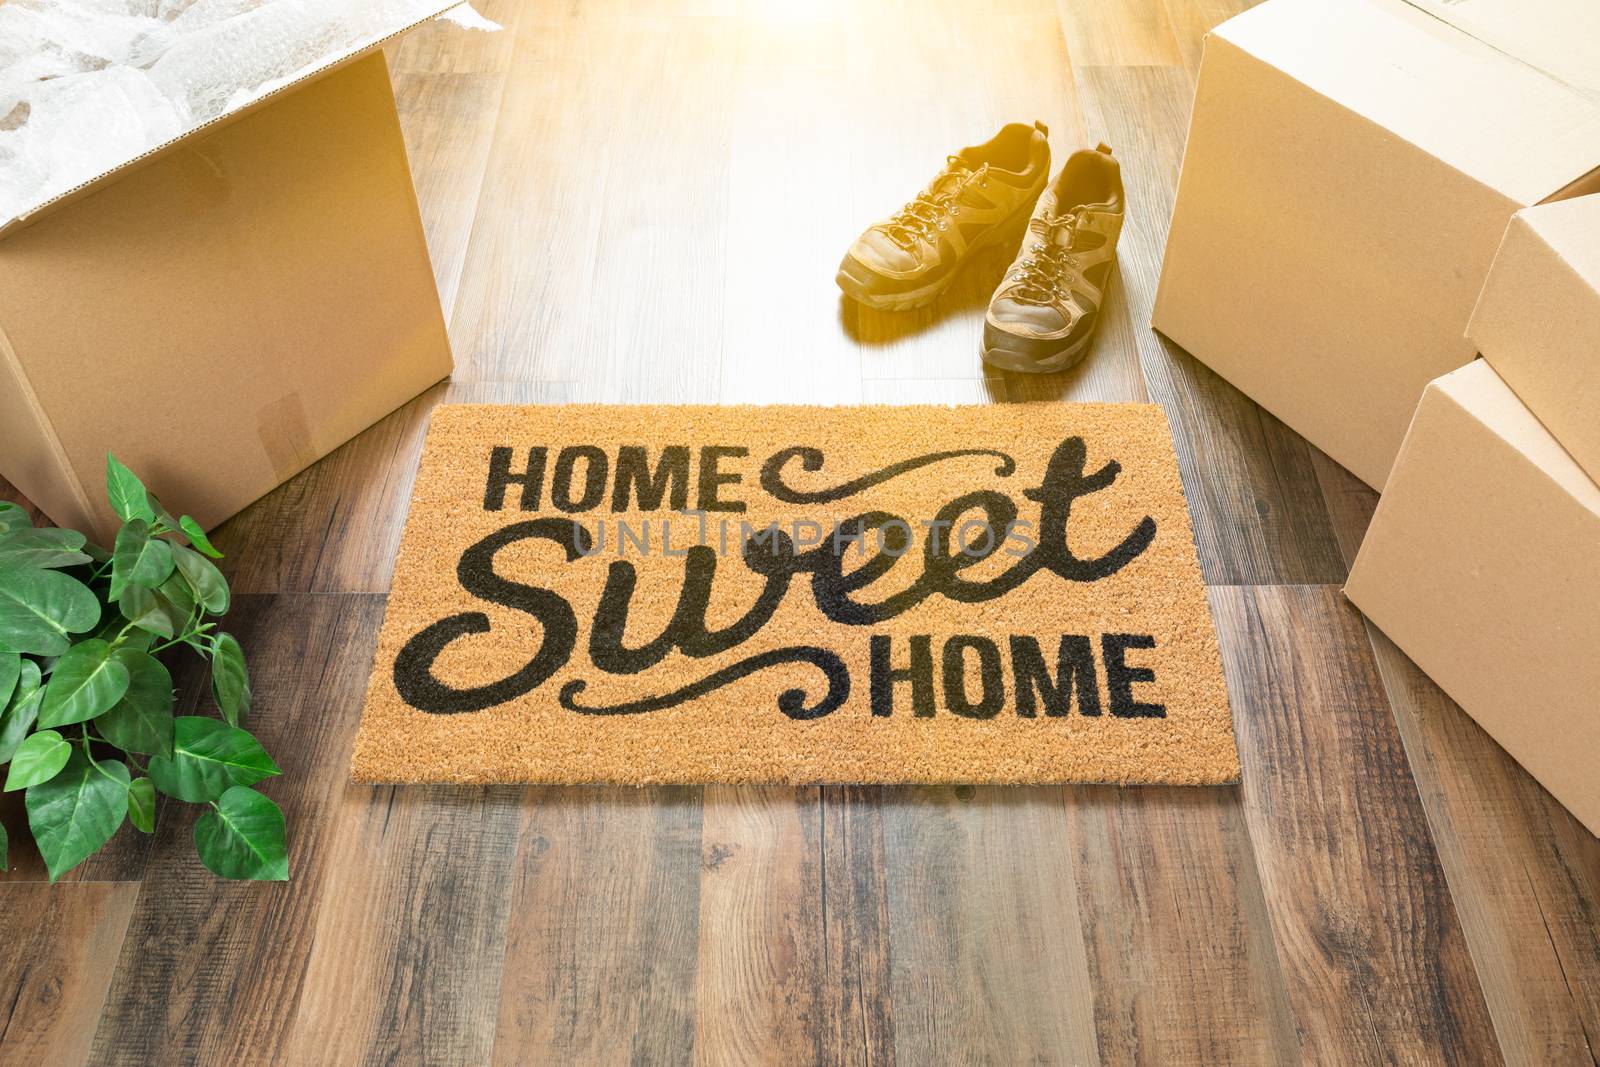 Home Sweet Home Welcome Mat, Moving Boxes, Shoes and Plant on Ha by Feverpitched